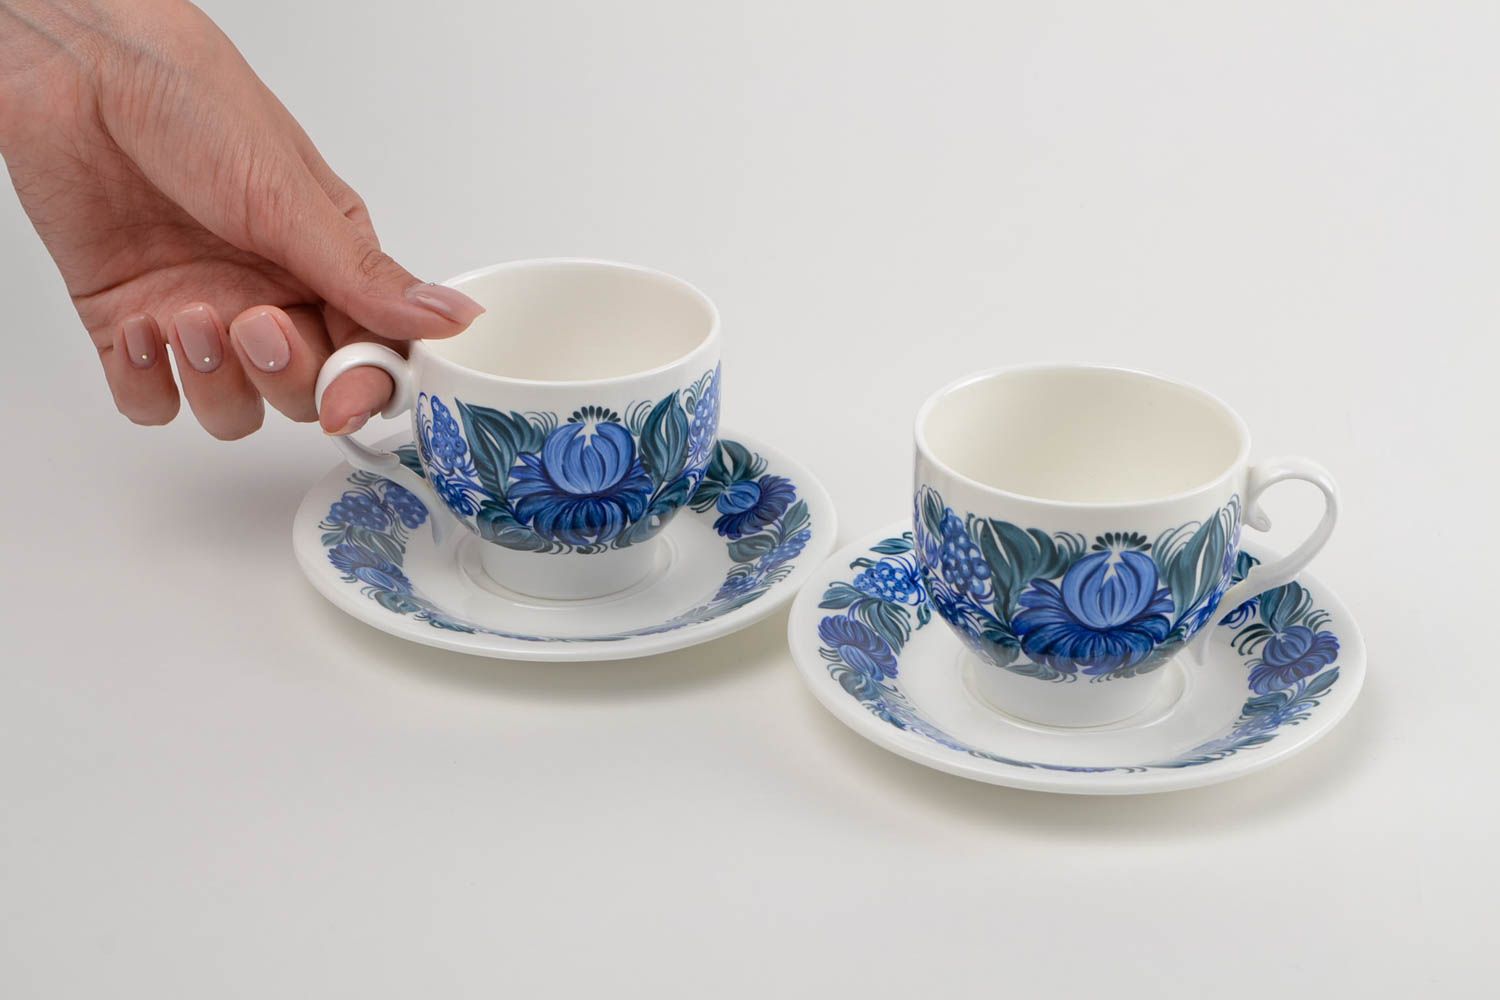 Set of two porcelain white and blue 5 oz tea cups and saucers with floral pattern photo 2